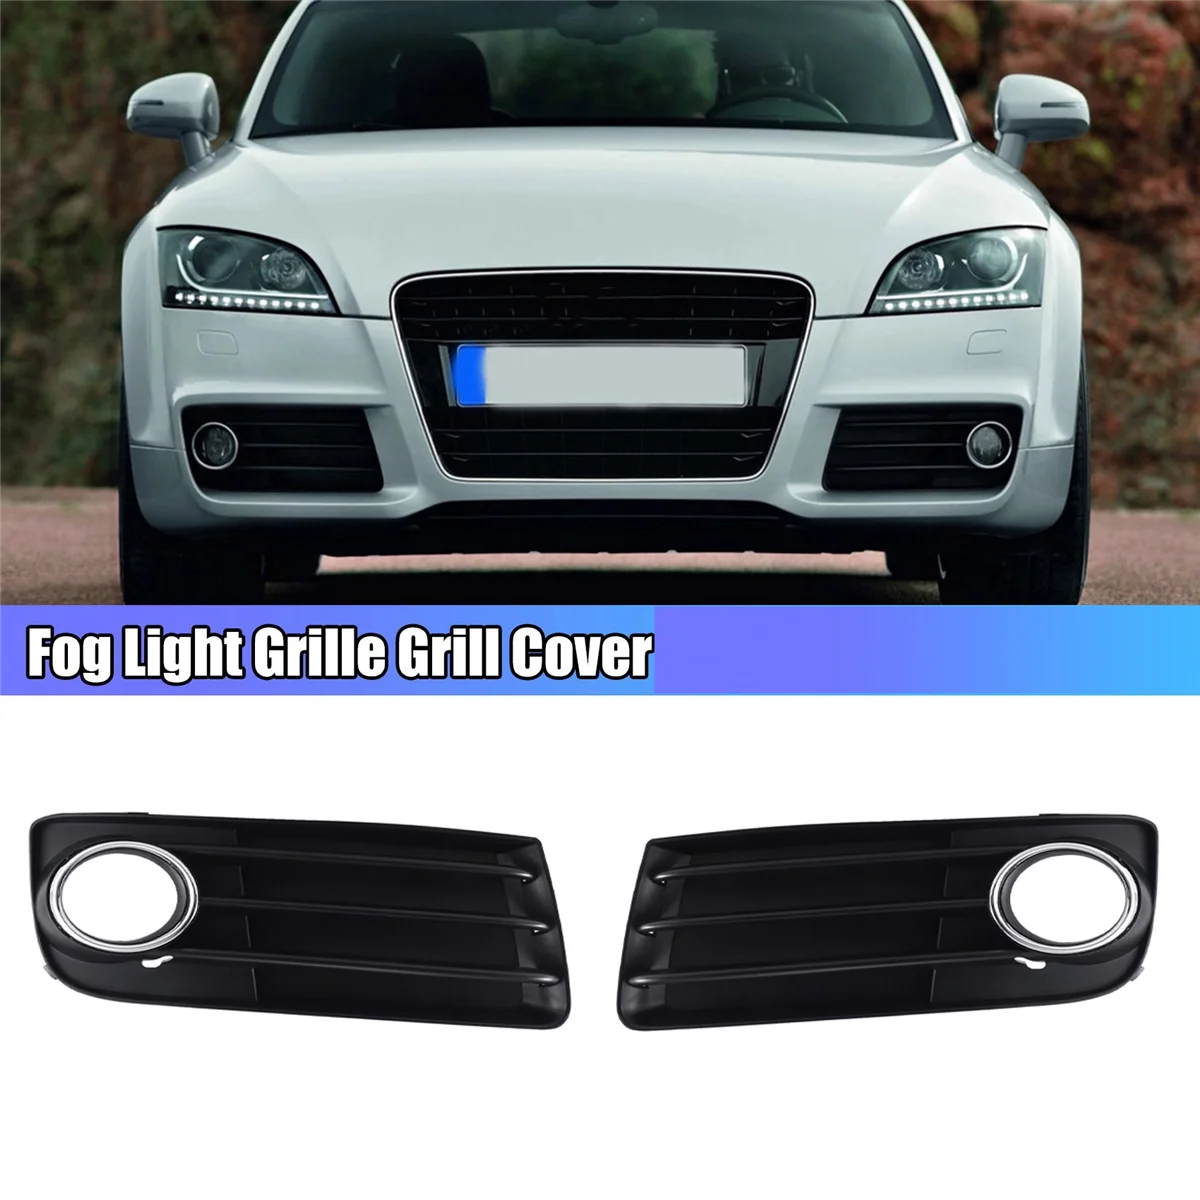 

Auto Right Side Front Bumper Fog Light Grille Grill Cover for Audi TT 2011-2014 8J0807682J